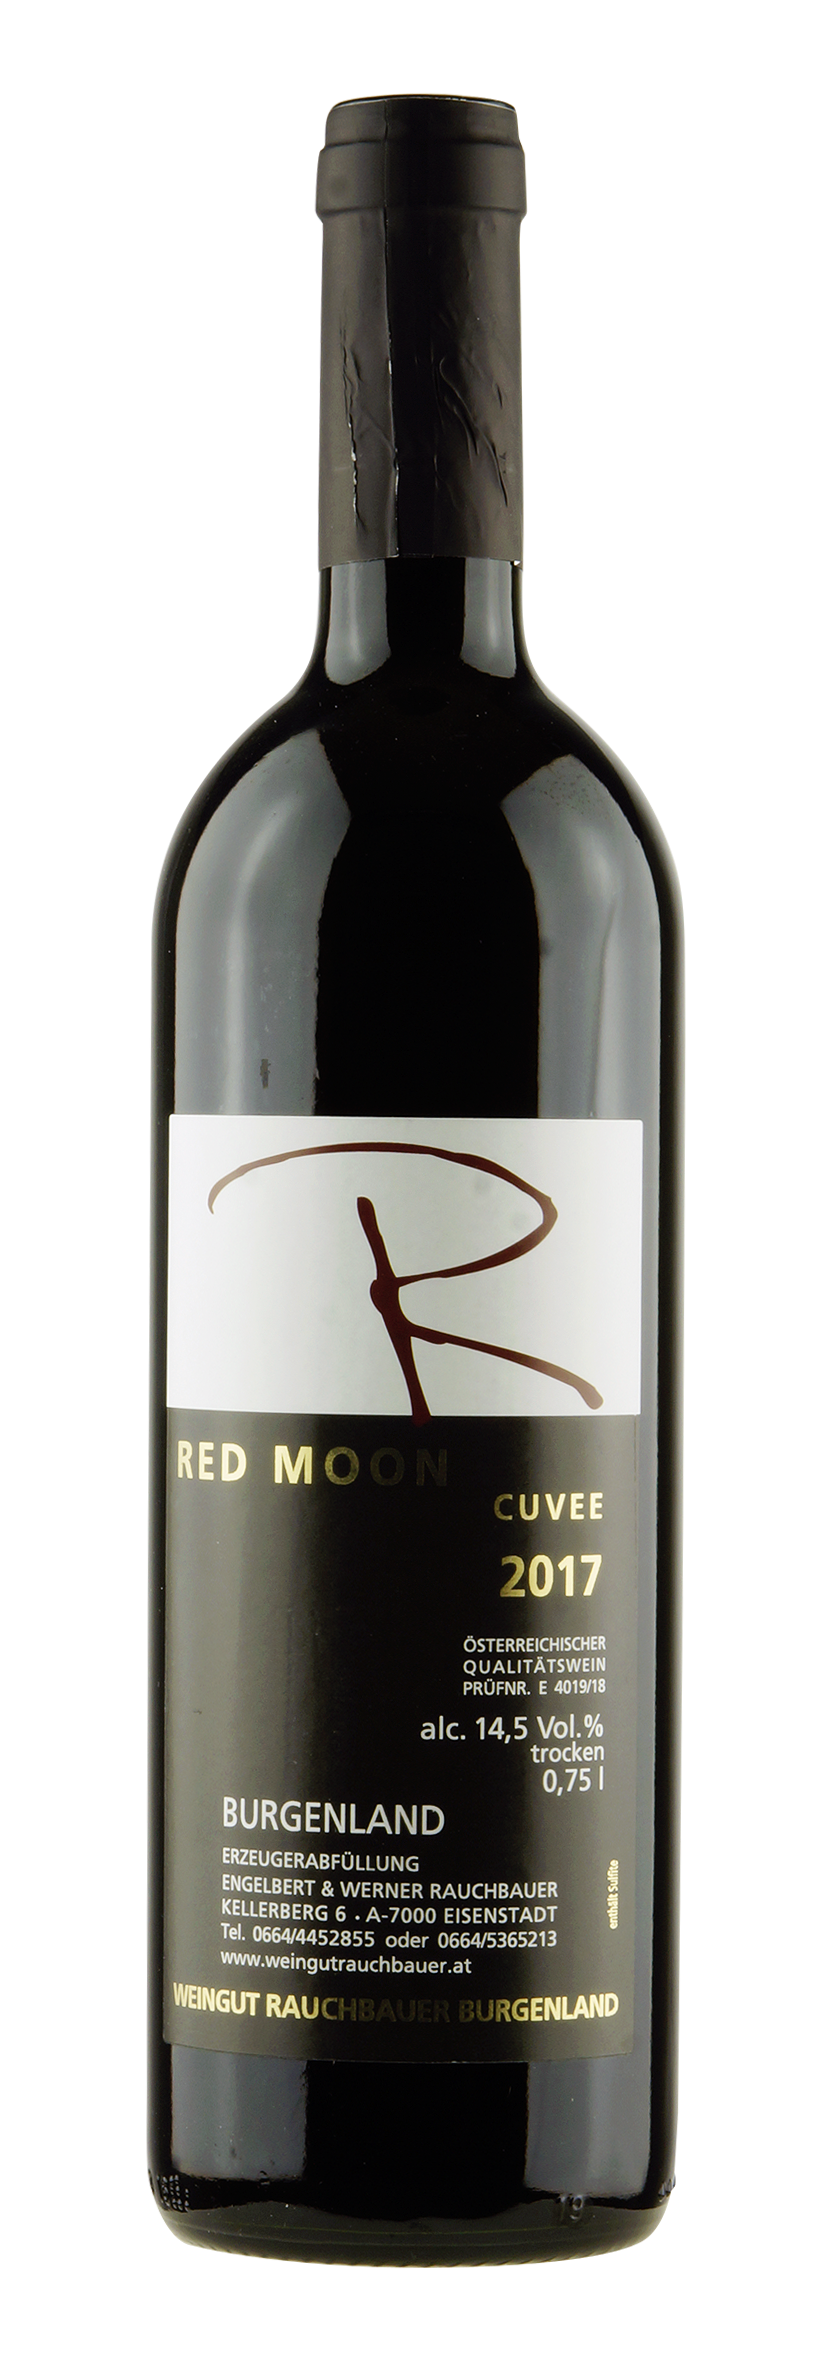 Burgenland  Red Moon Cuvée 2017